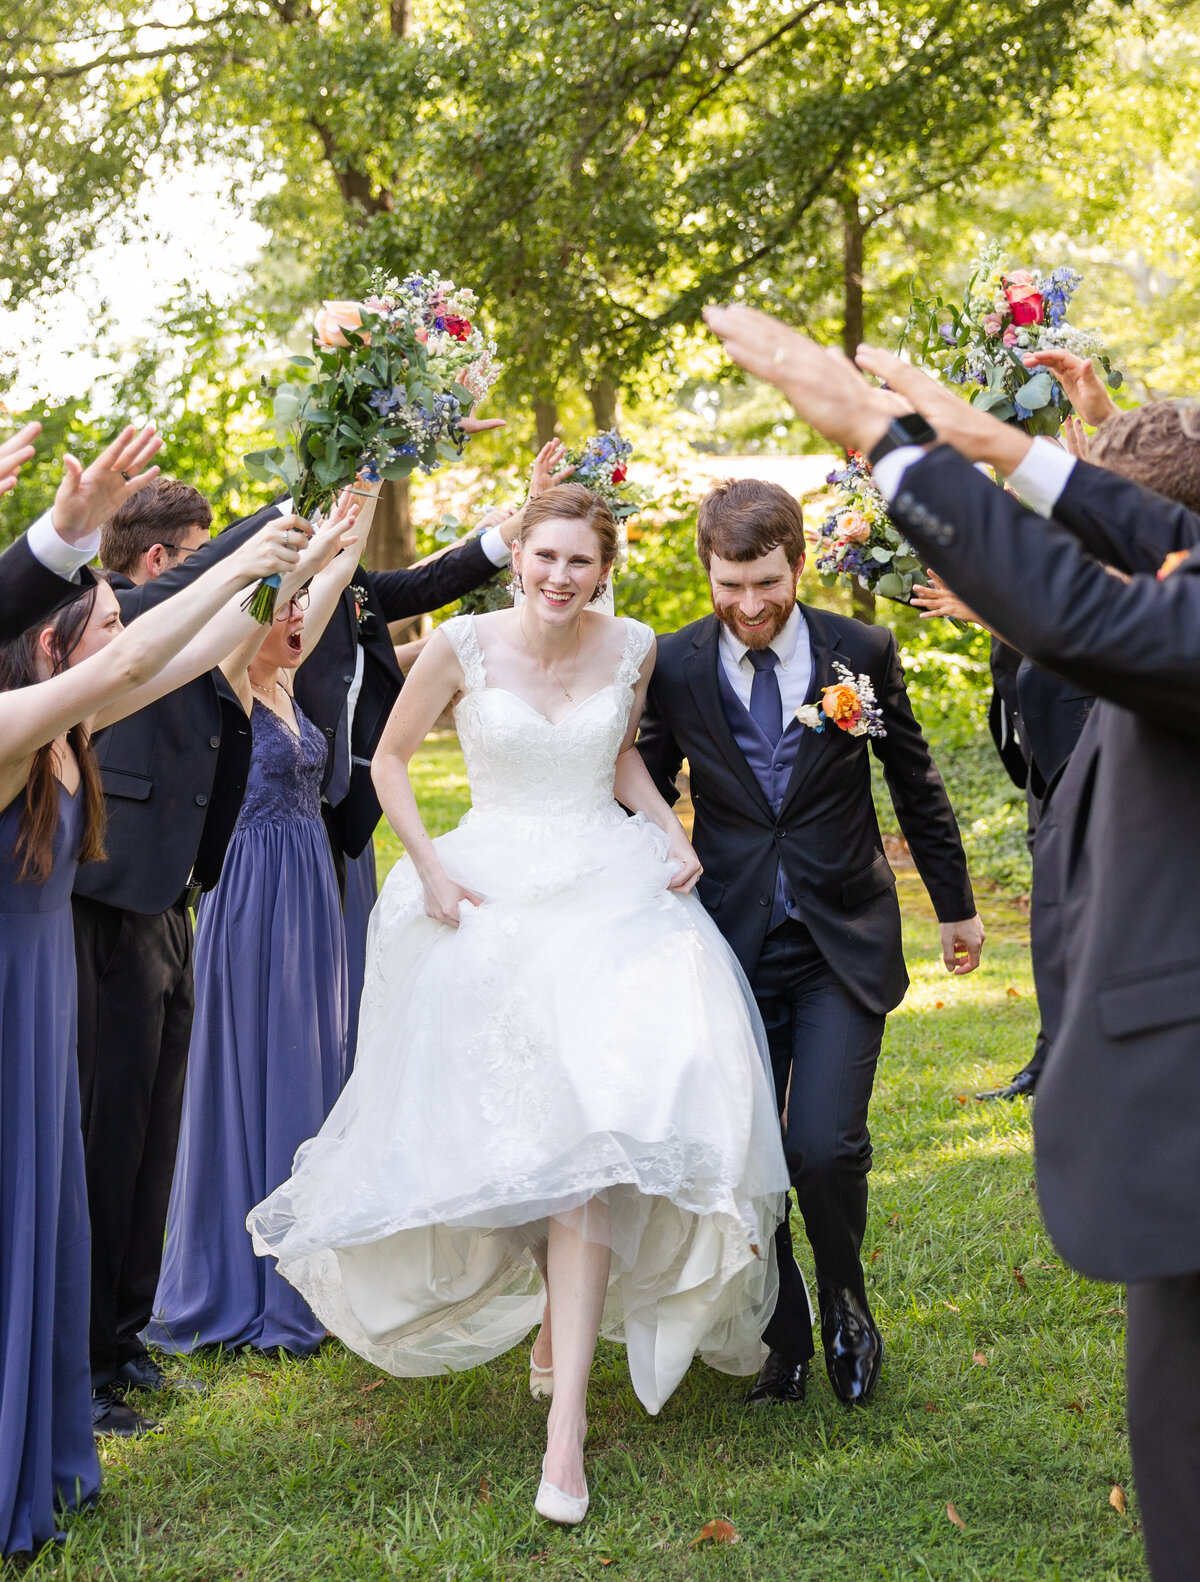 guests celebrating as bride and groom exit wedding